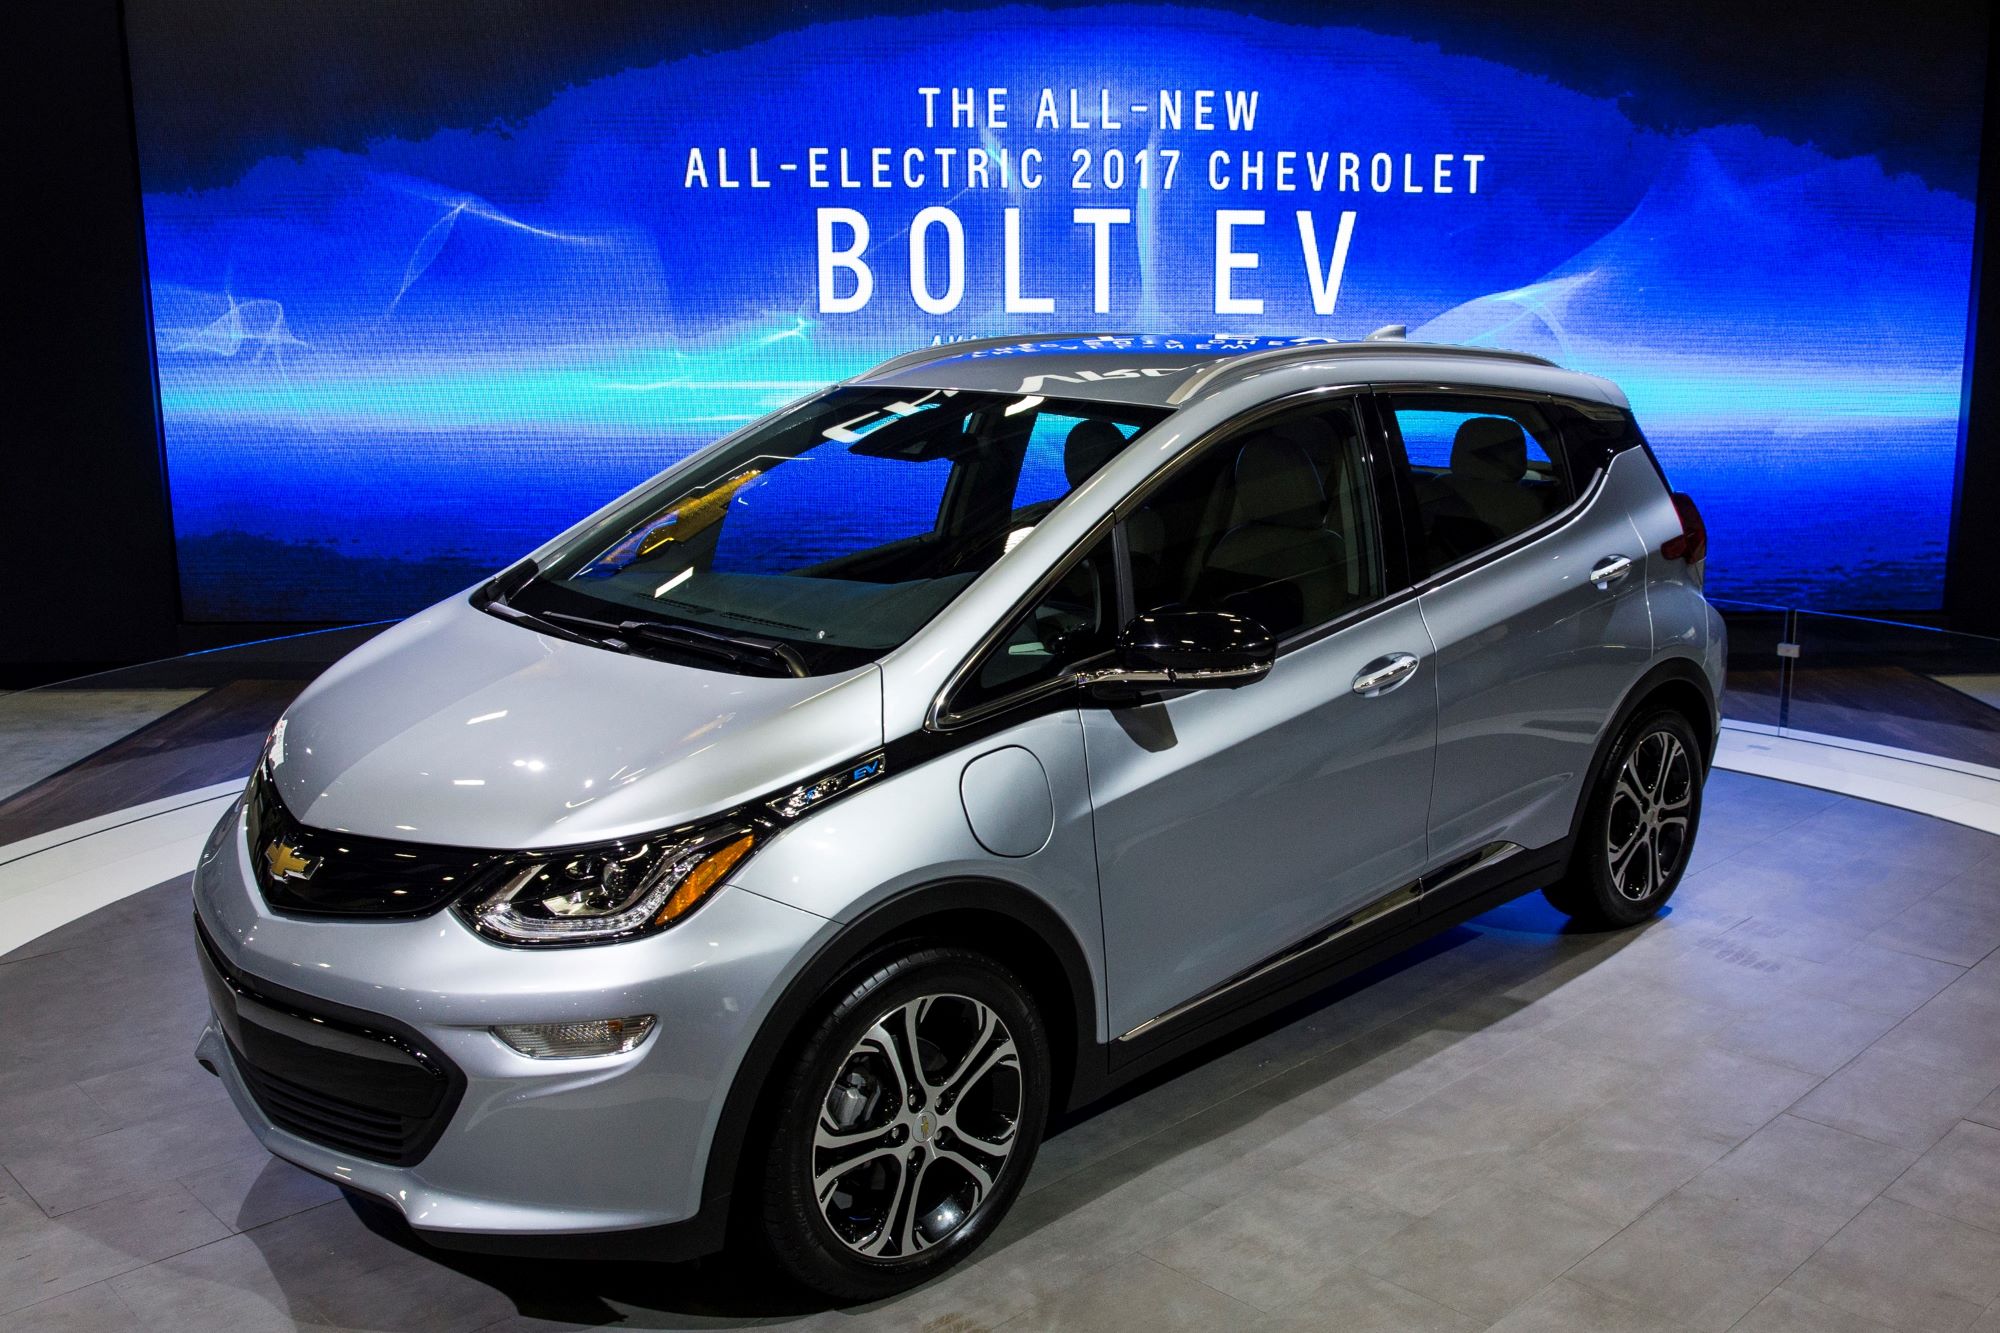 A silver 2017 Chevy Bolt, which has among those recalled, against a blue background with white print on it.